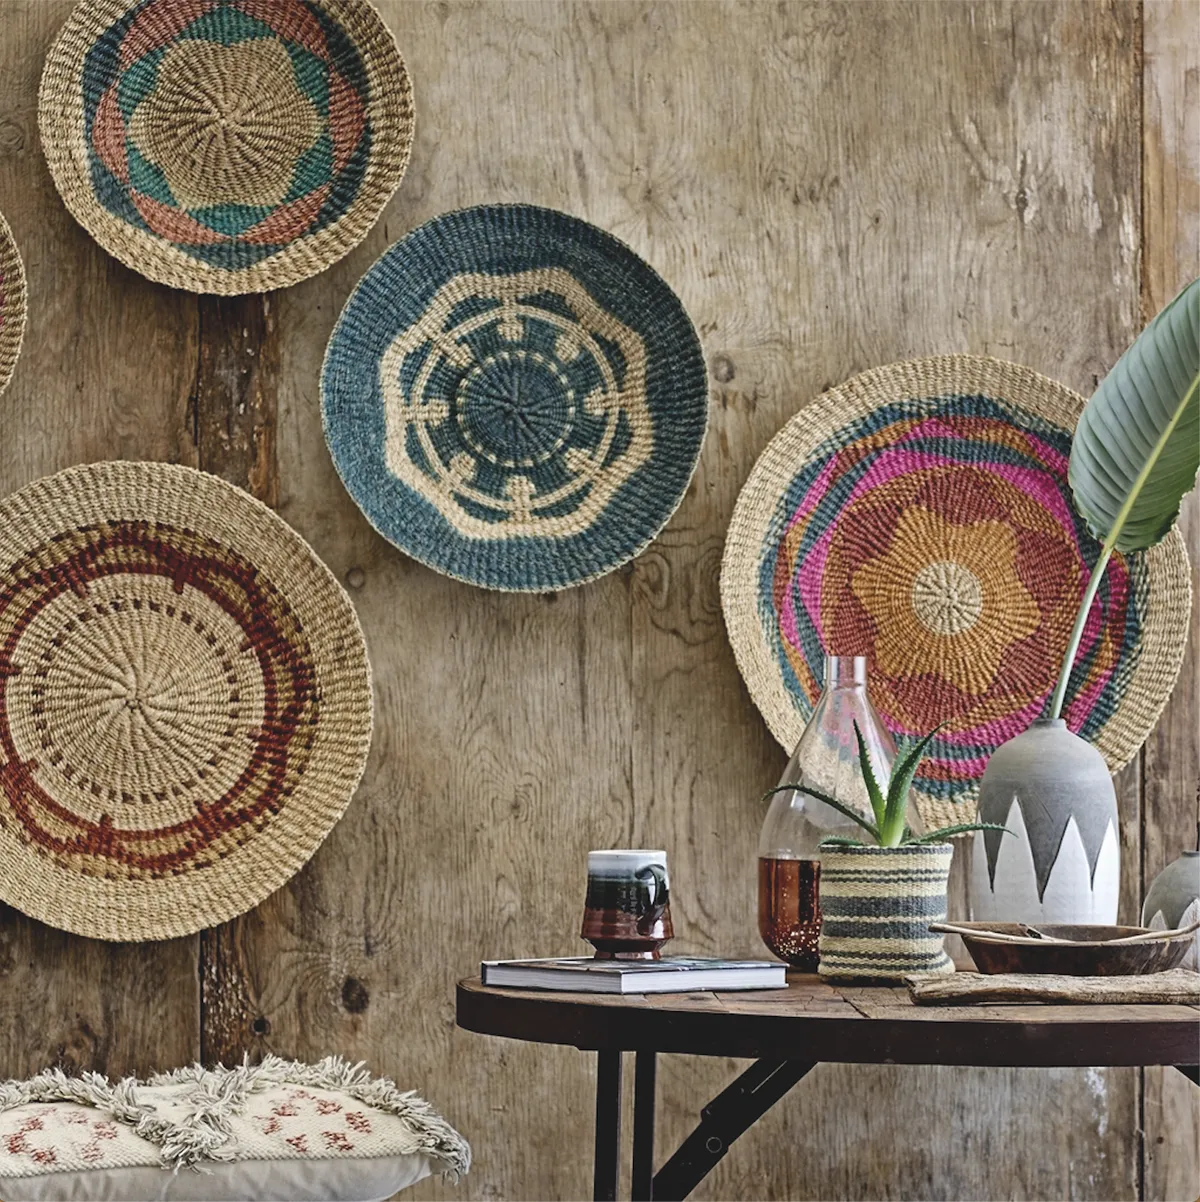 Make a feature of handicrafts and souvenirs from far-off places, by turning them into decorative wall art